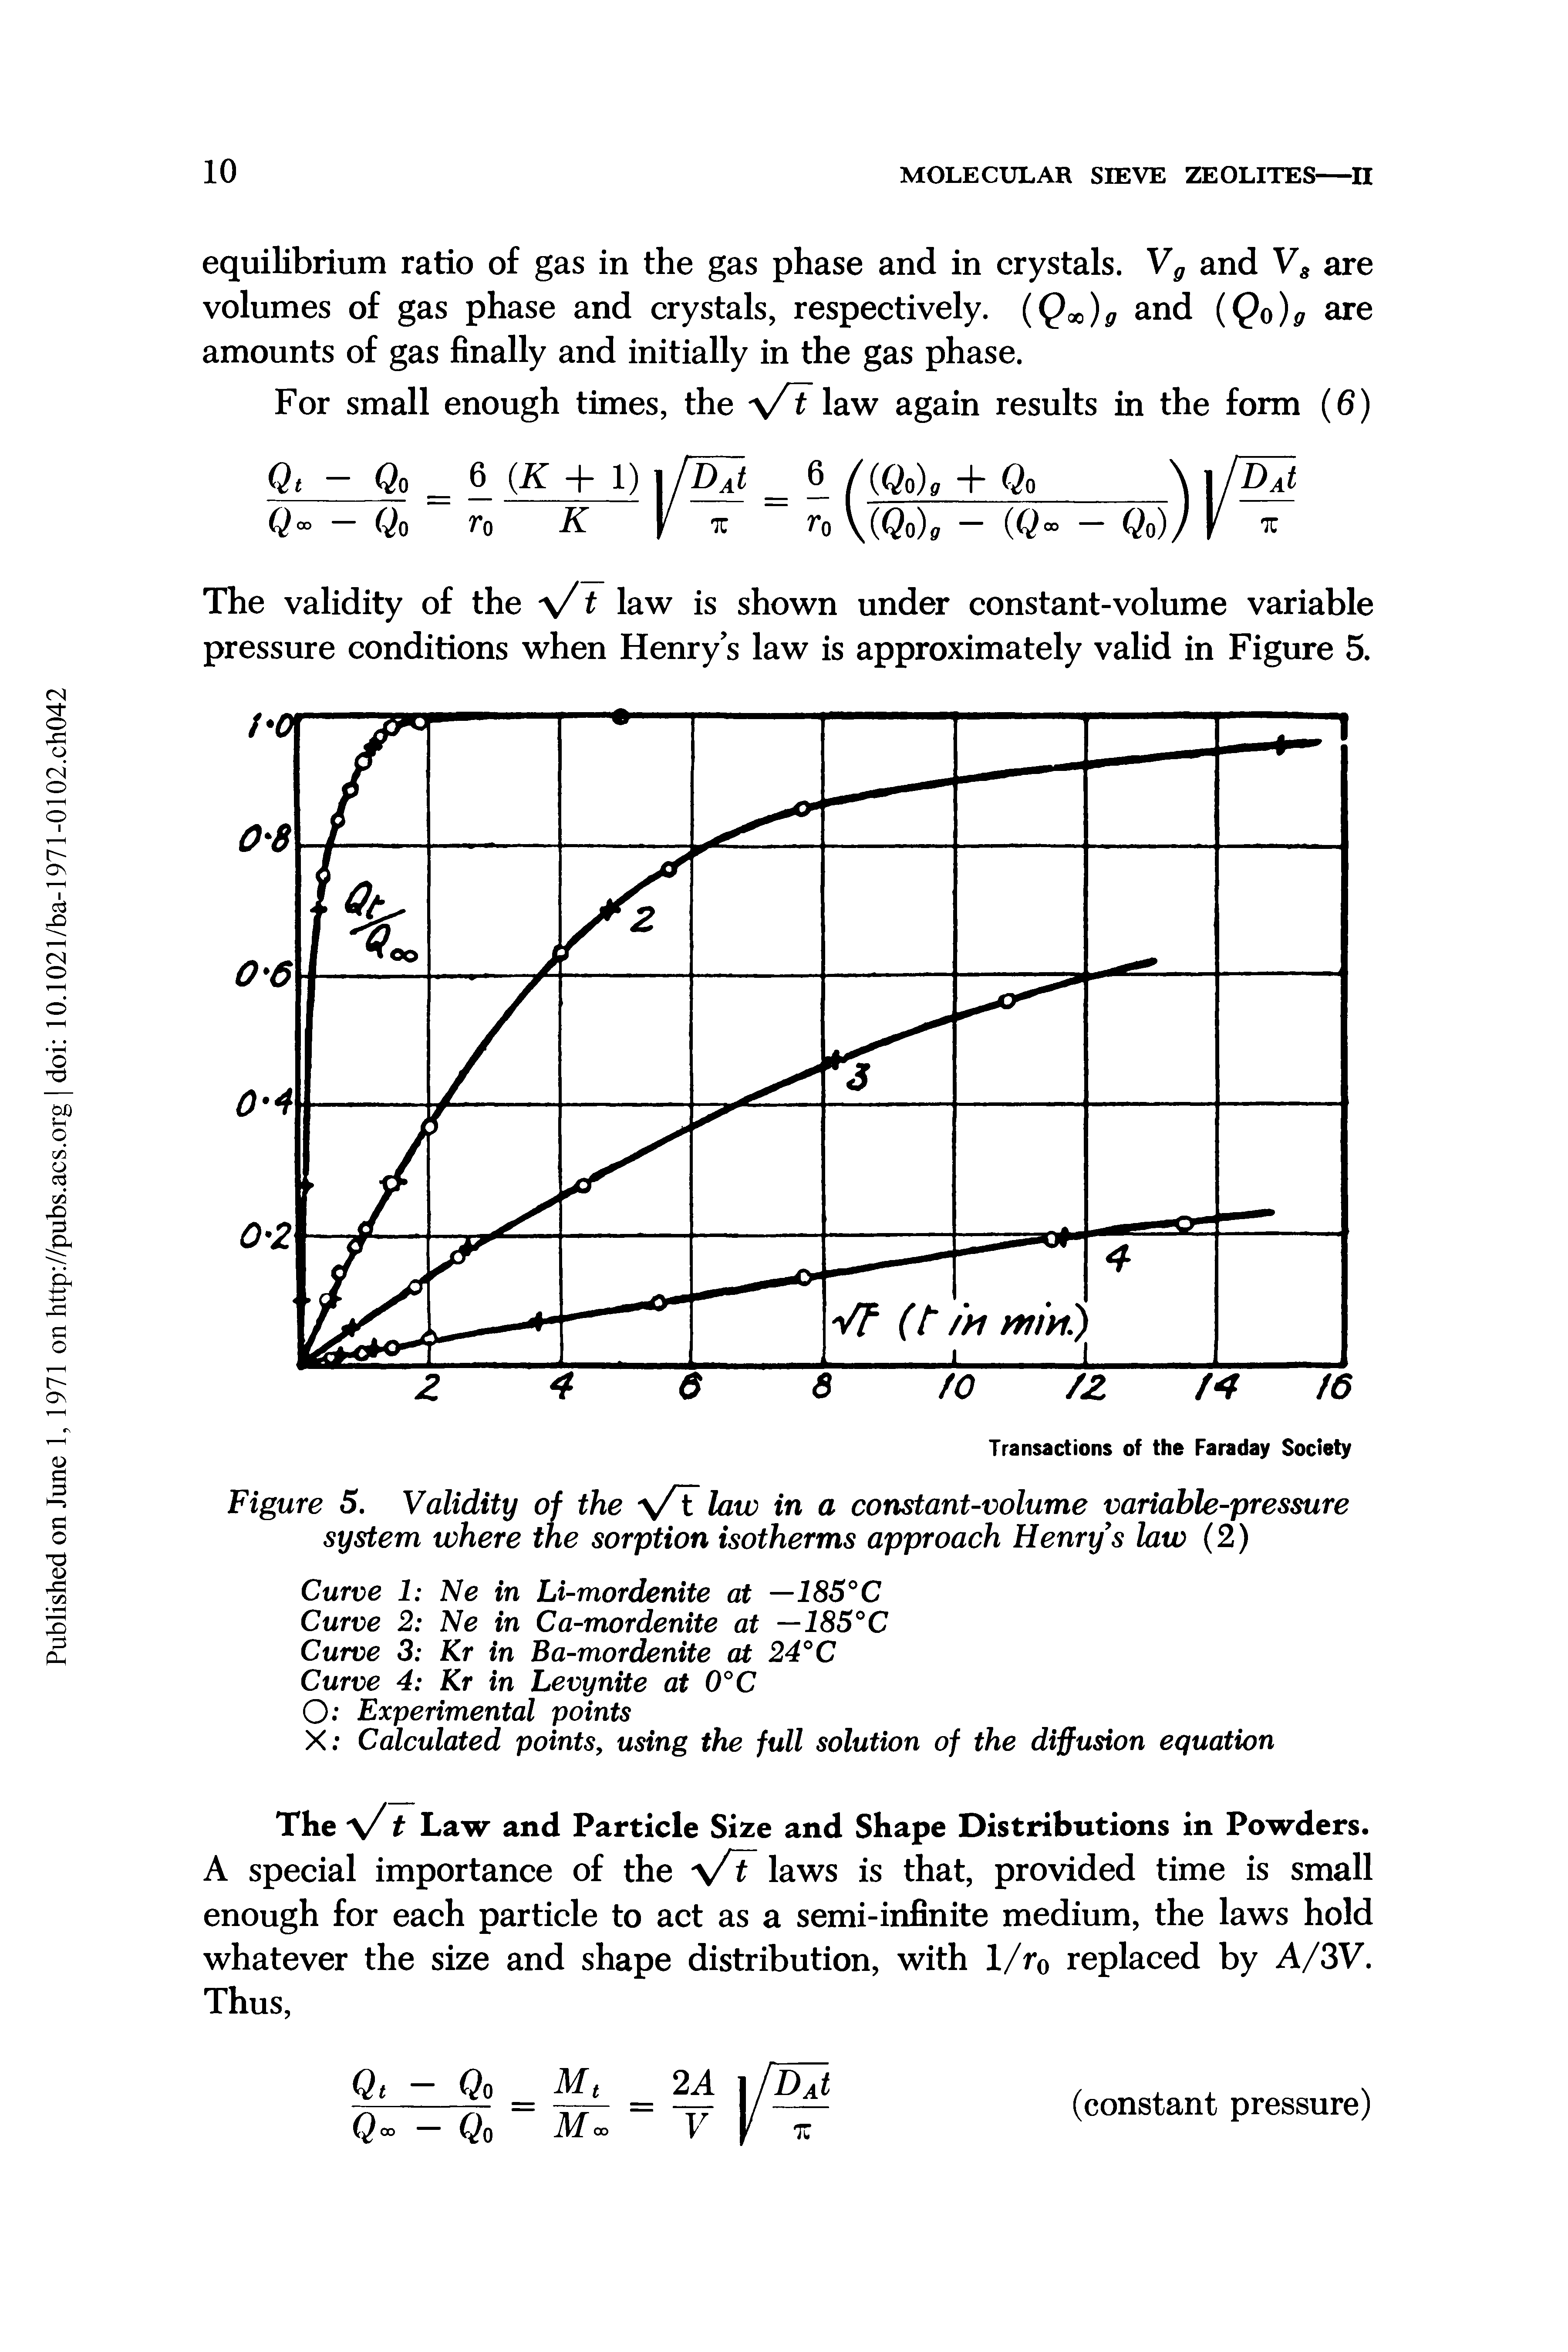 Figure 5. Validity of the y/T law in a constant-volume variable-pressure system where the sorption isotherms approach Henry s law (2)...